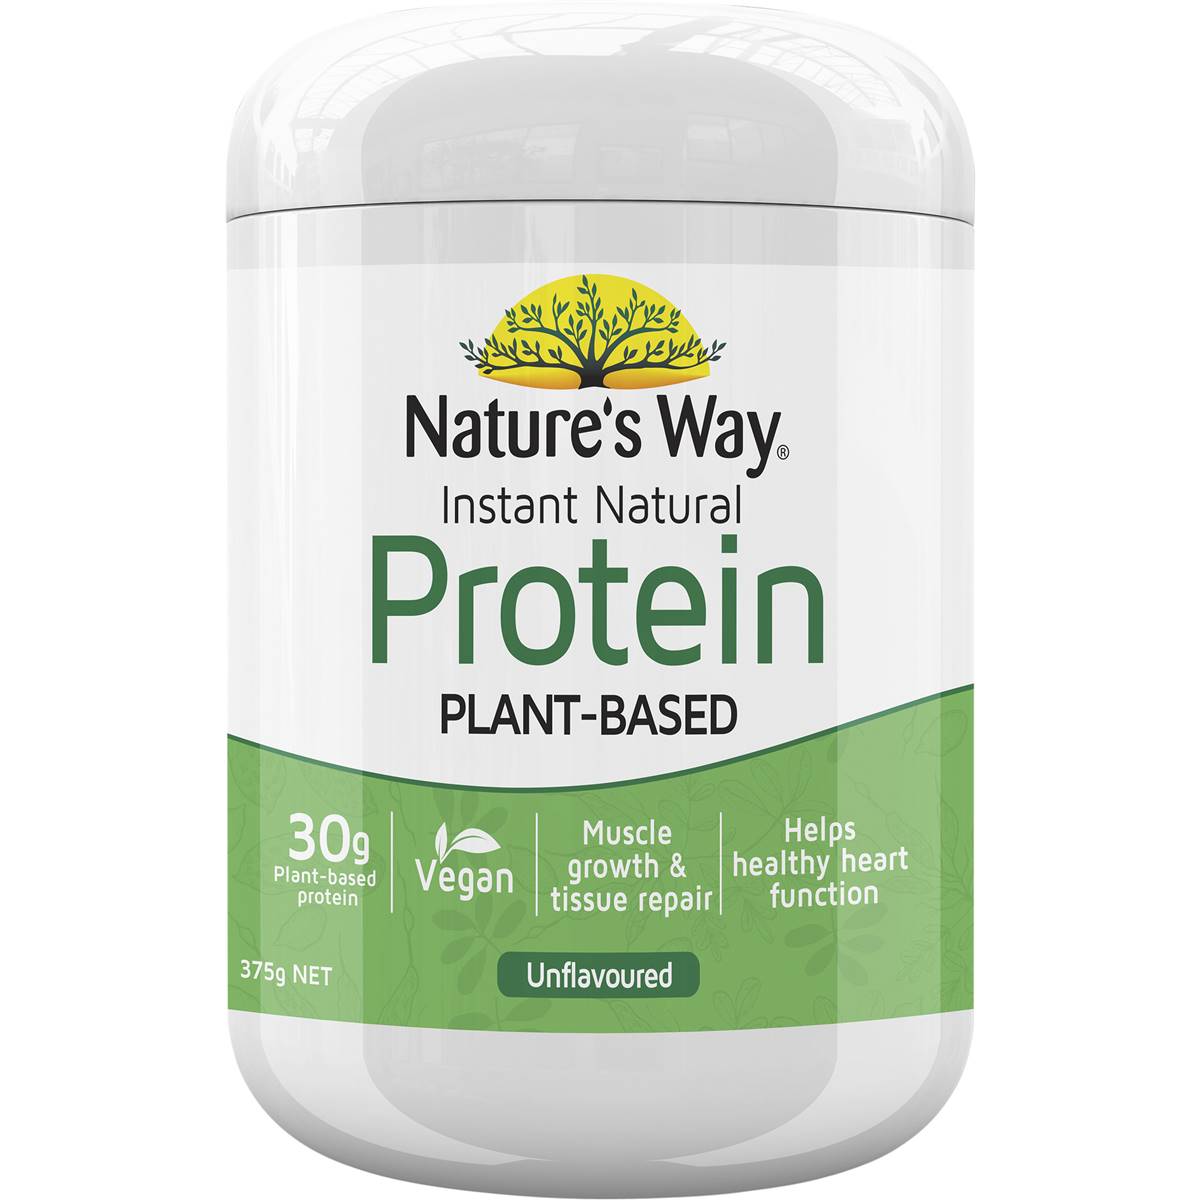 Calories in Nature's Way Protein Powder Instant Natural